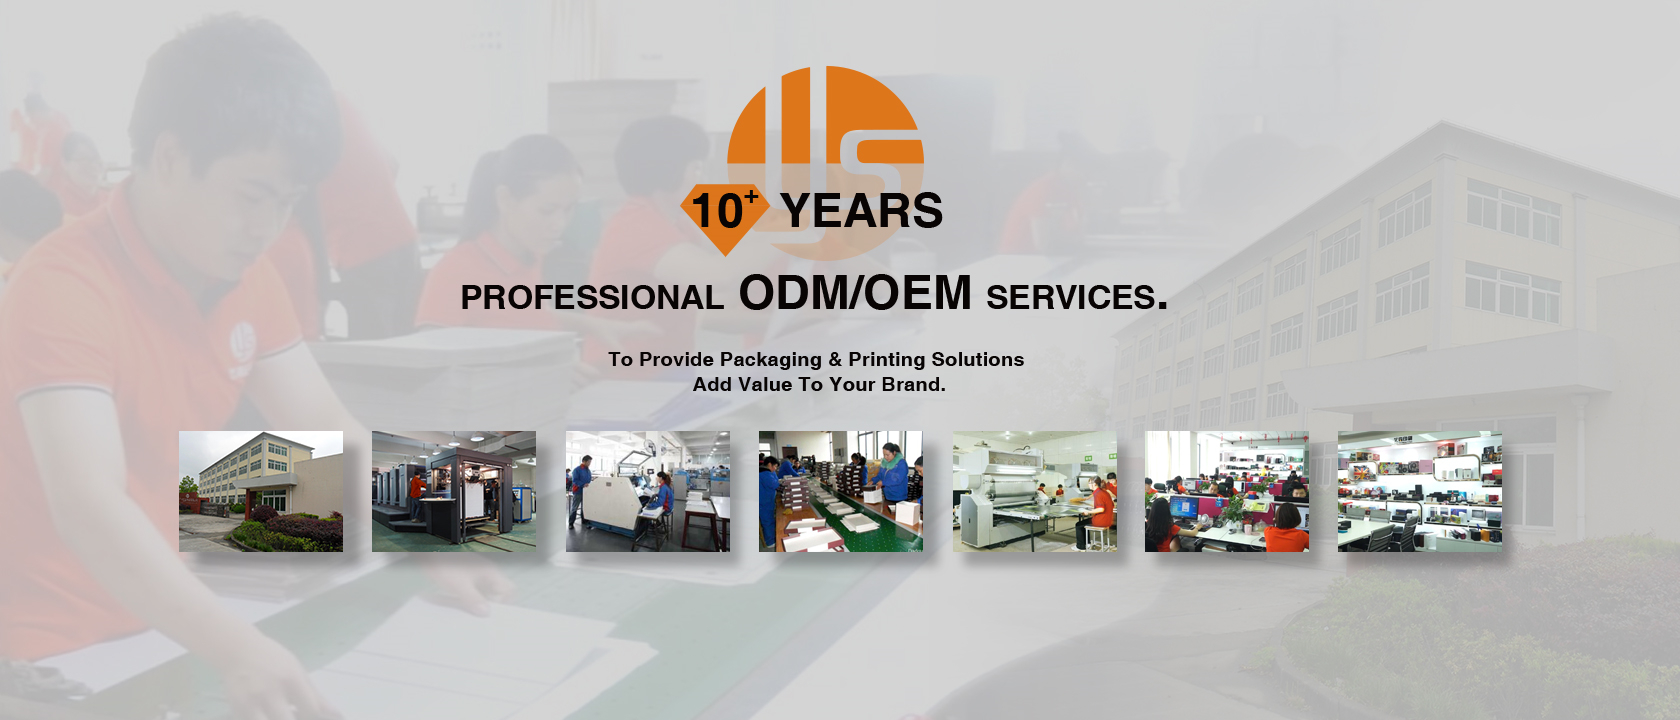 10+ YEARS PROFESSIONAL ODM/OEM SERVICES -YISON PRINTING